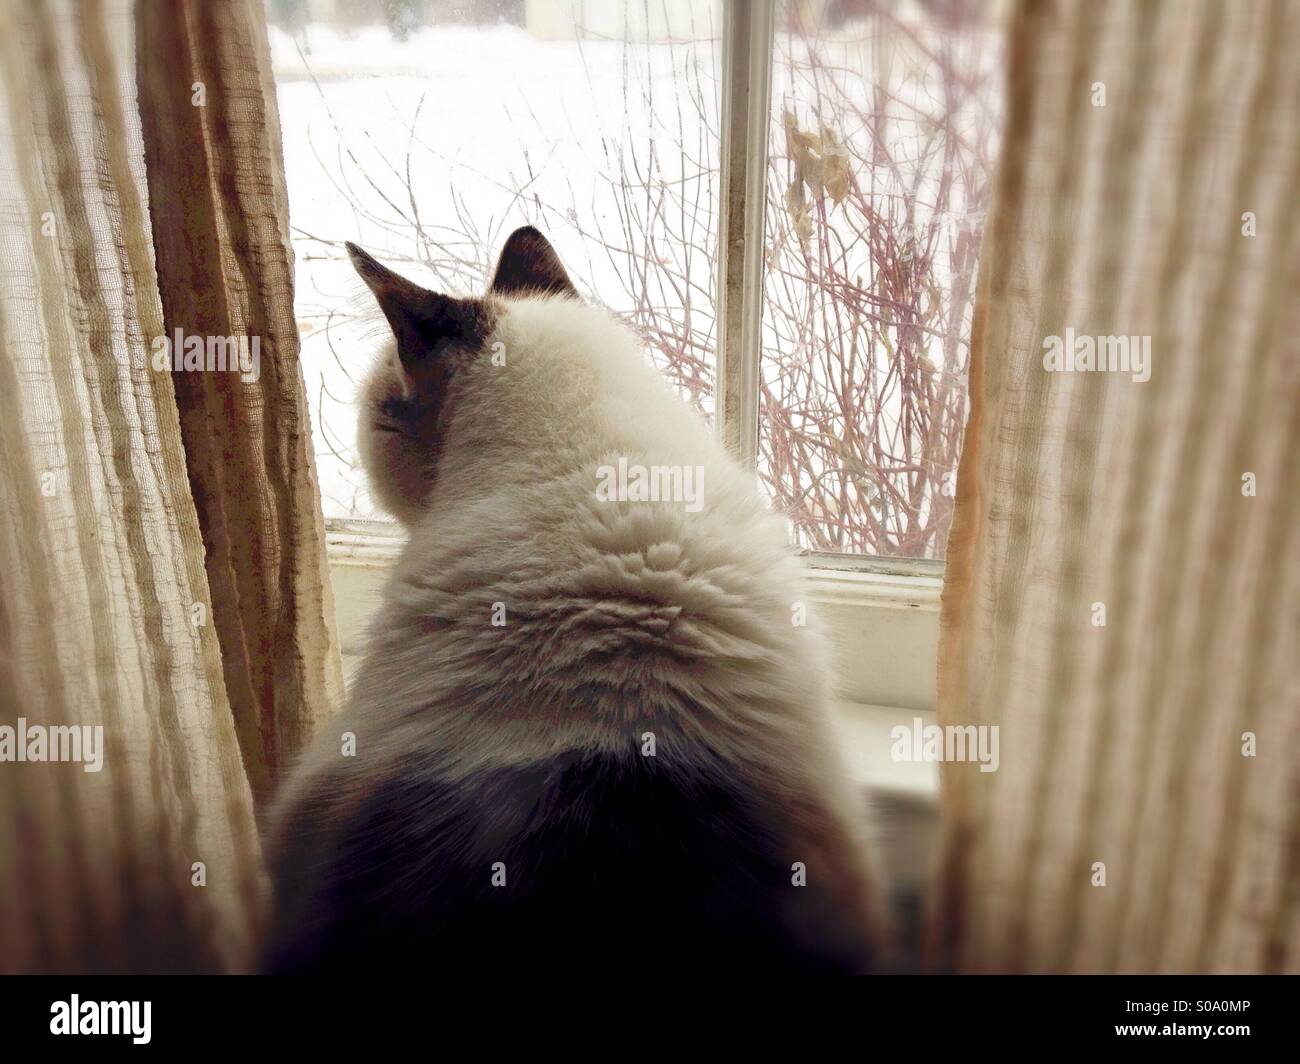 Cat looking out window at snow. Stock Photo